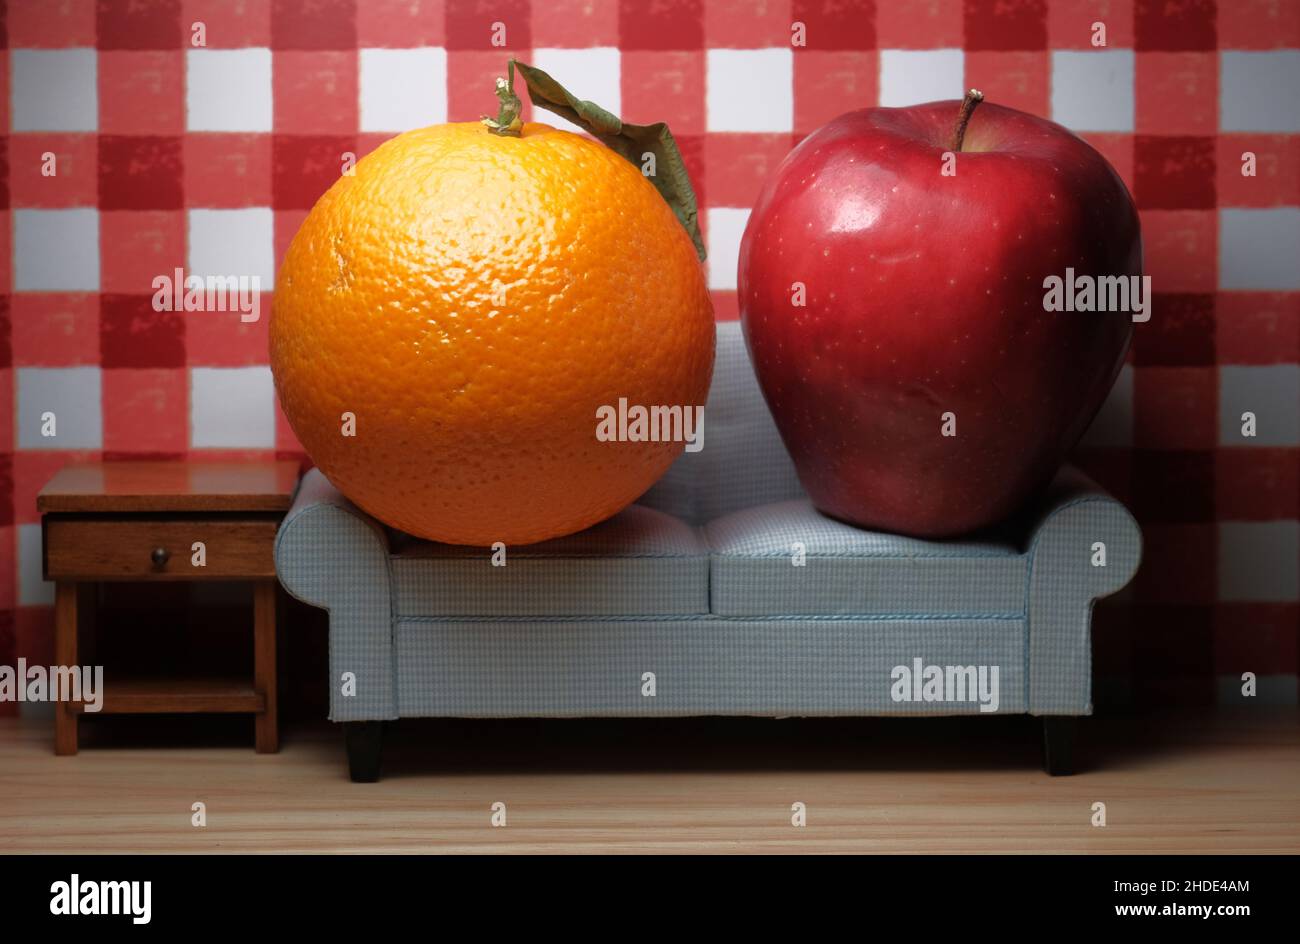 Comparing apples to oranges idiom concept with fruit sitting on sofa Stock Photo